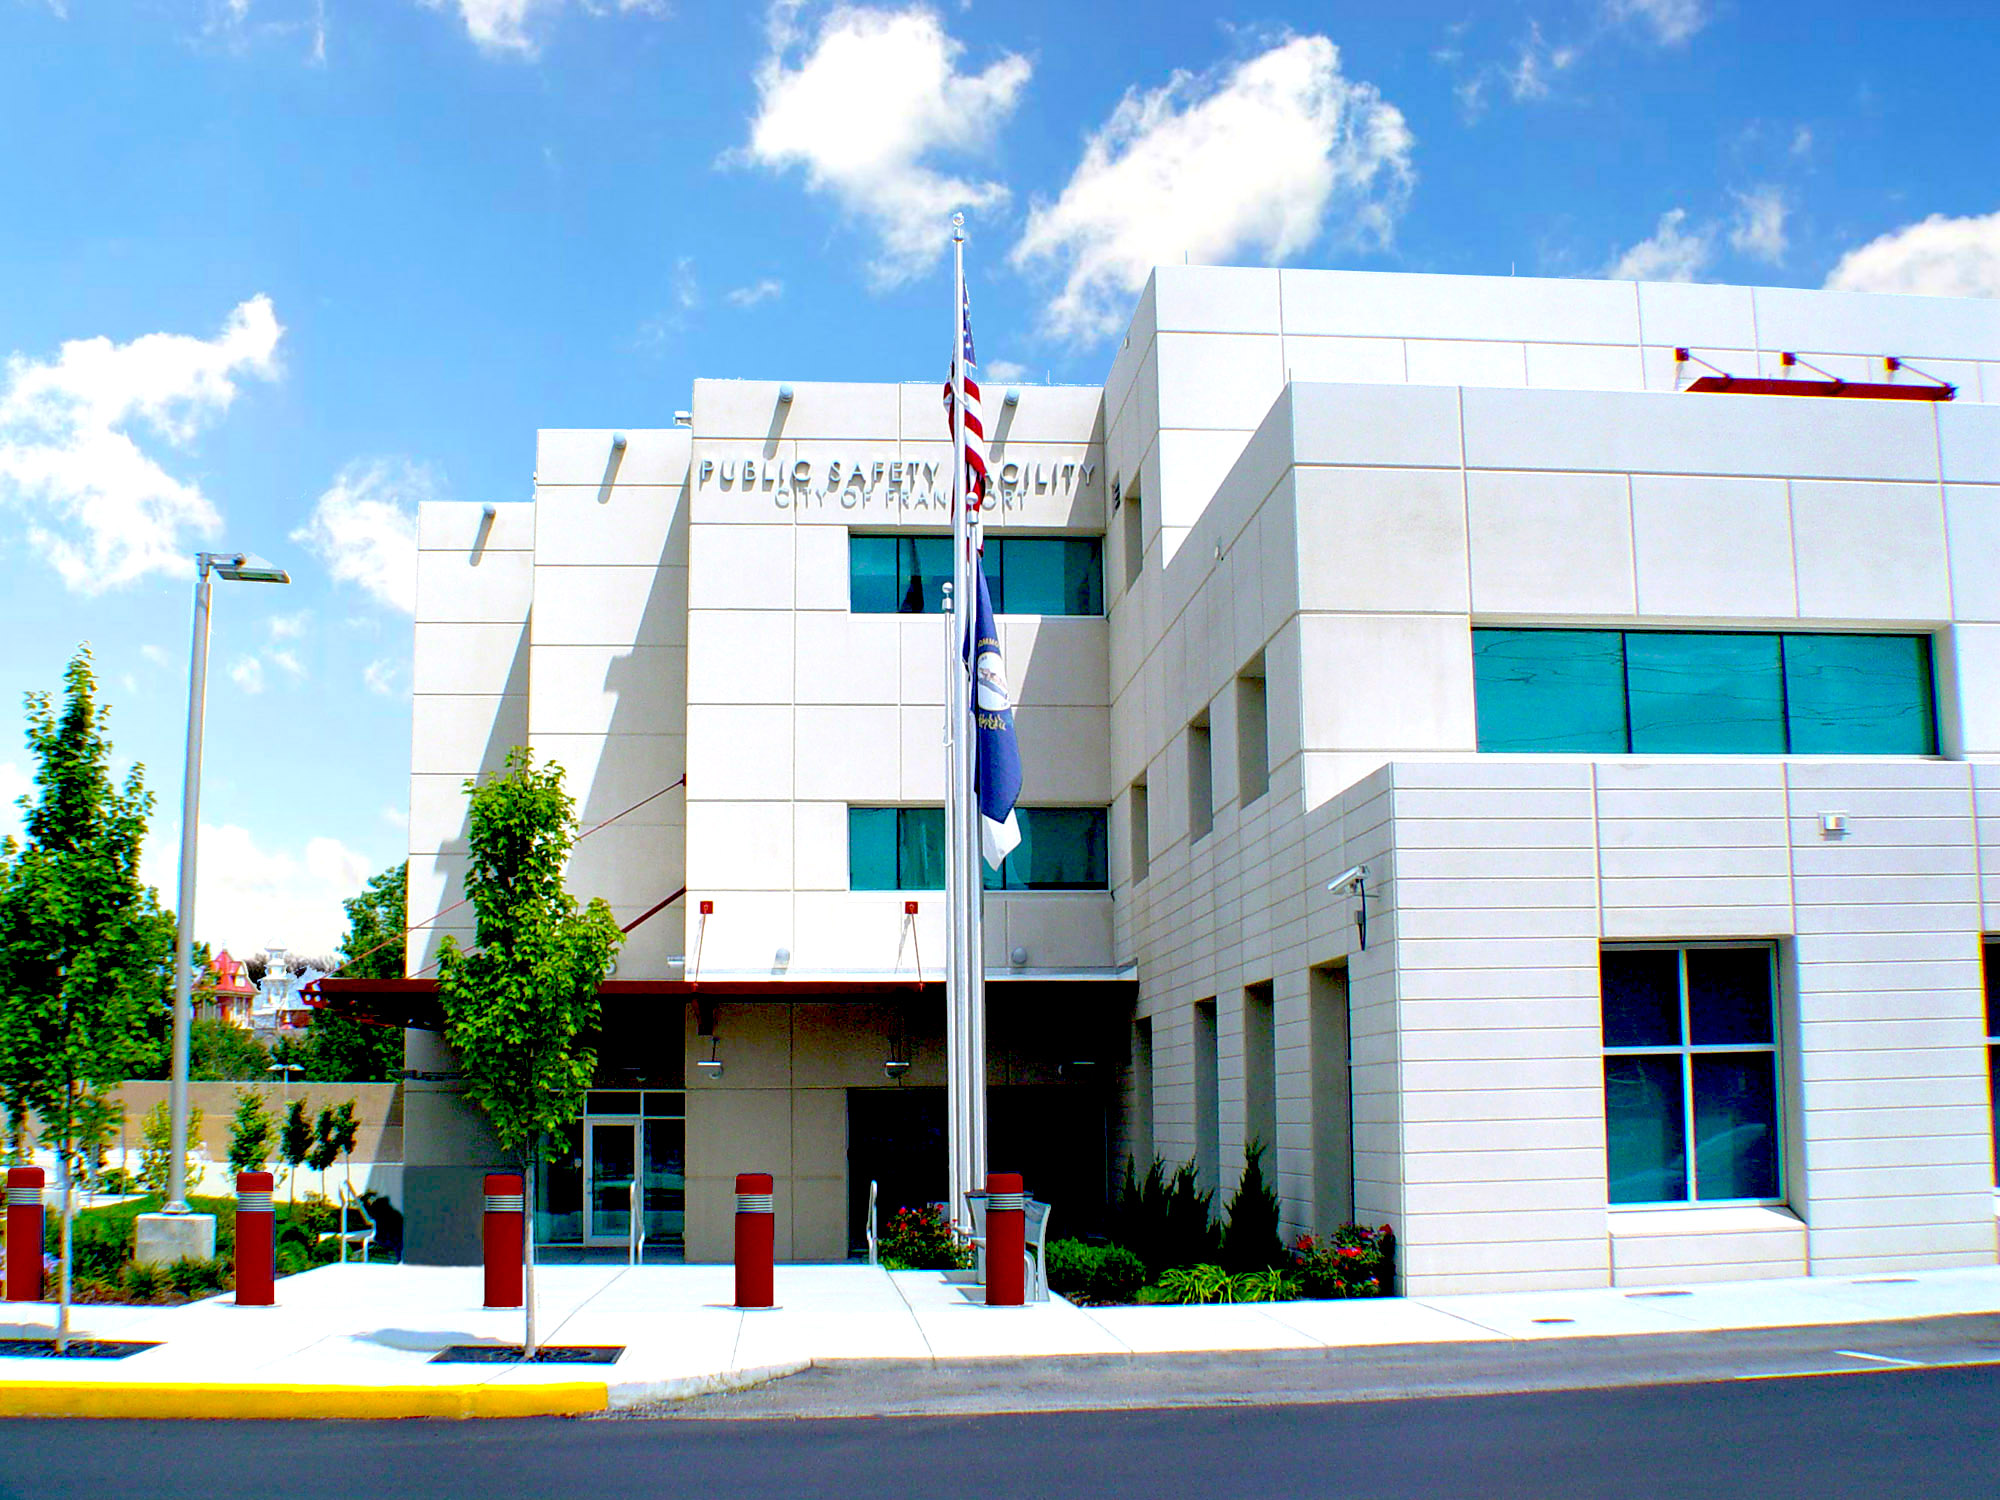 Frankfort Public Safety Facility